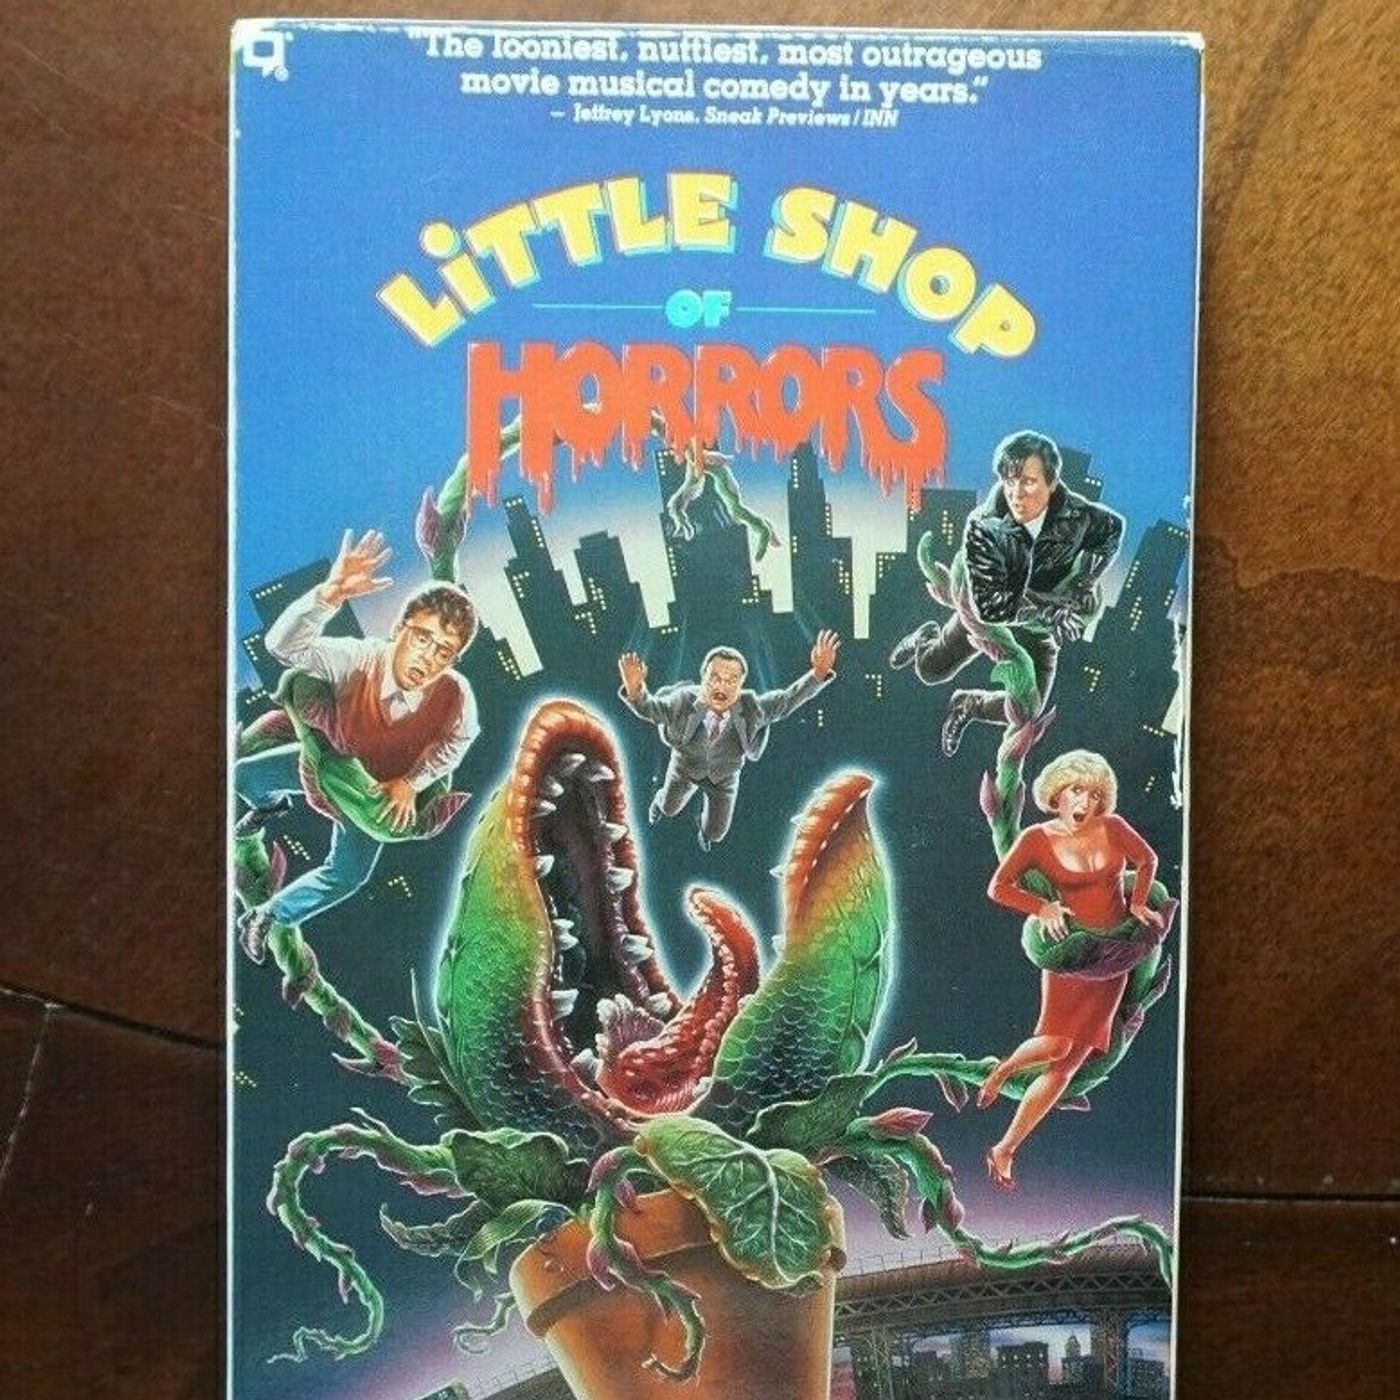 1986 - Little Shop of Horrors Image